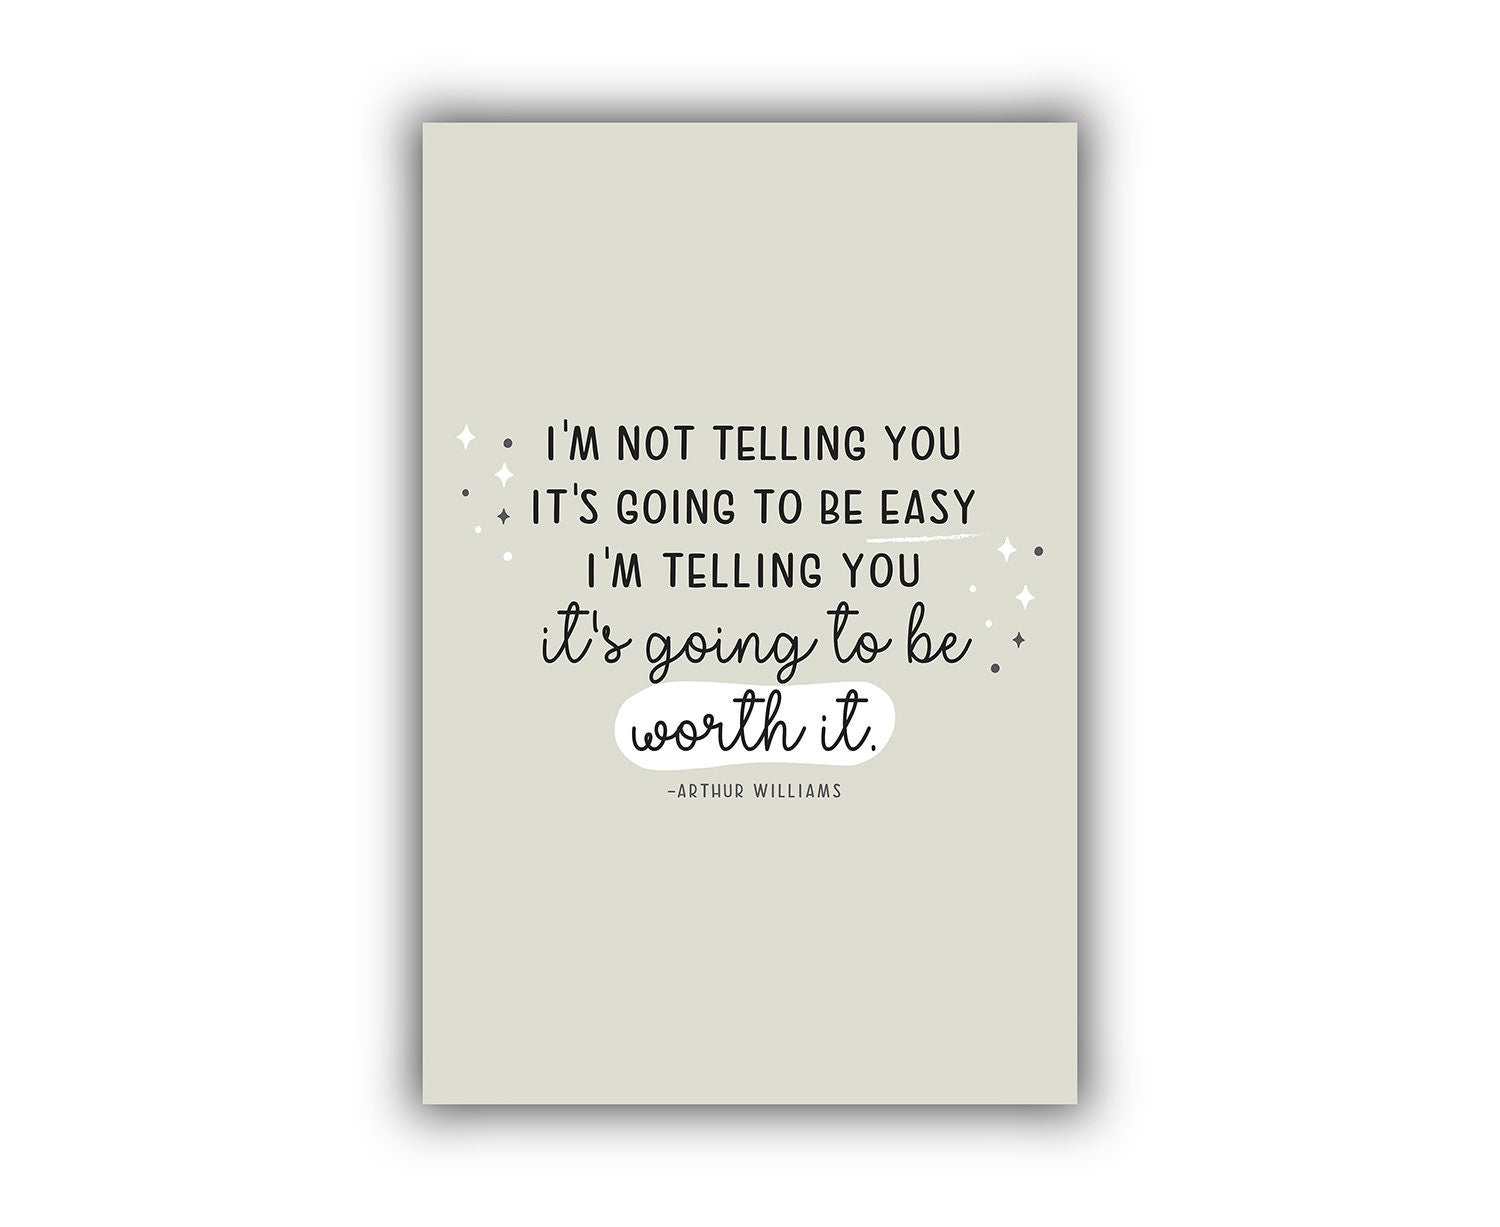 I'm telling you.. Arthur Williams Quote Poster print, Home wall decor, Quote print, Motivational quotes, Entrepreneur Print, Office wall art